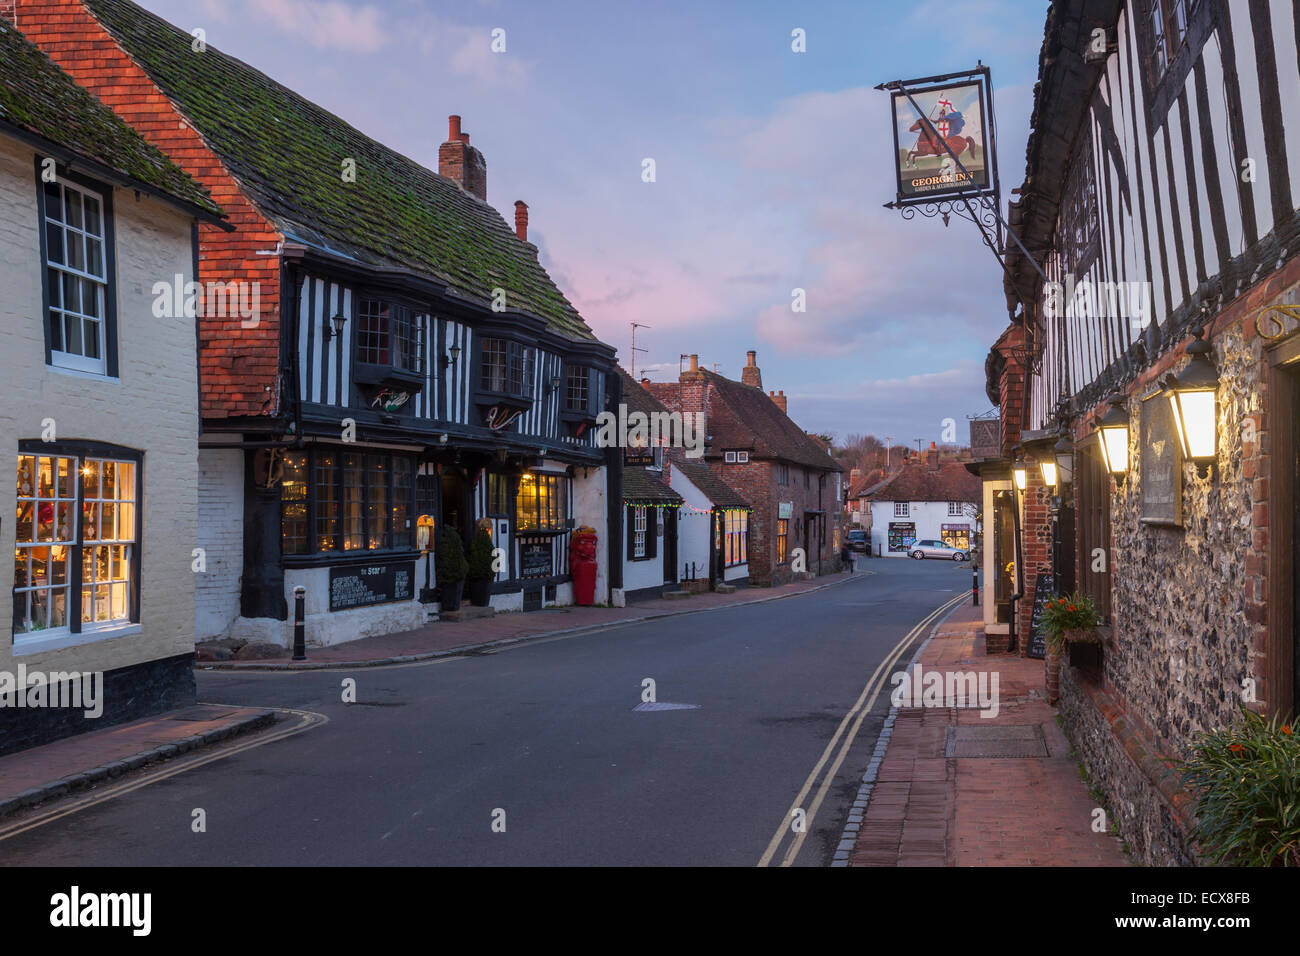 Evening on High Street in Alfriston, East Sussex, England. Stock Photo